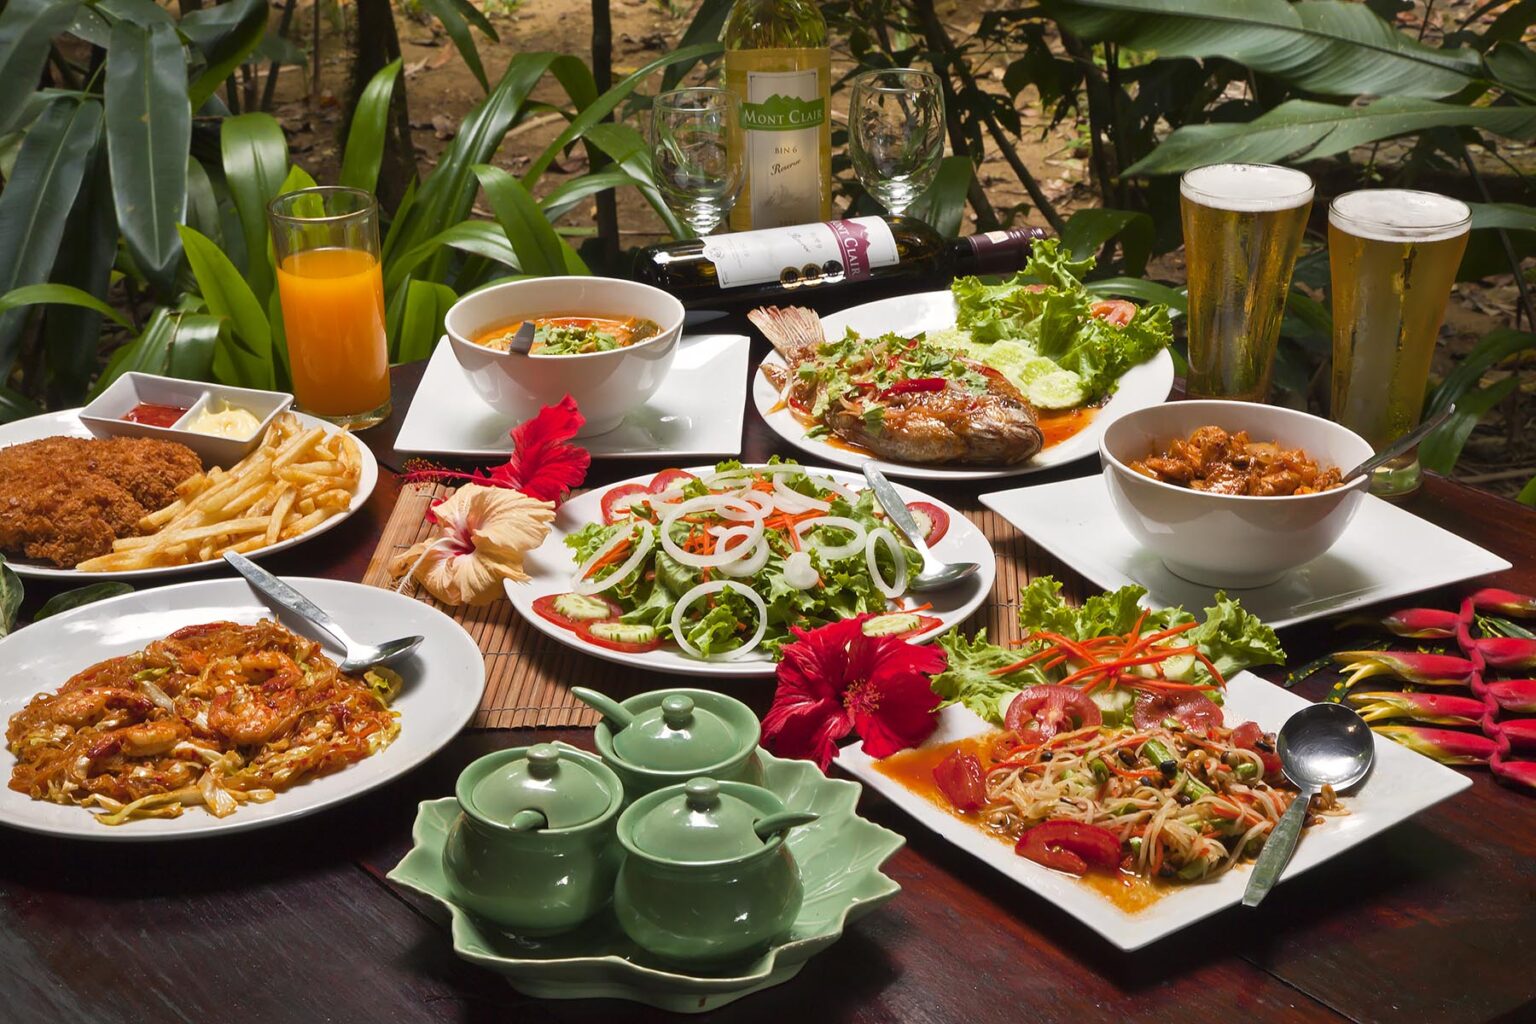 Delicious THAI CUISINE is served at OUR JUNGLE HOUSE a lodge in the rainforest near KHAO SOK NATIONAL PARK - SURATHANI PROVENCE, THAILAND